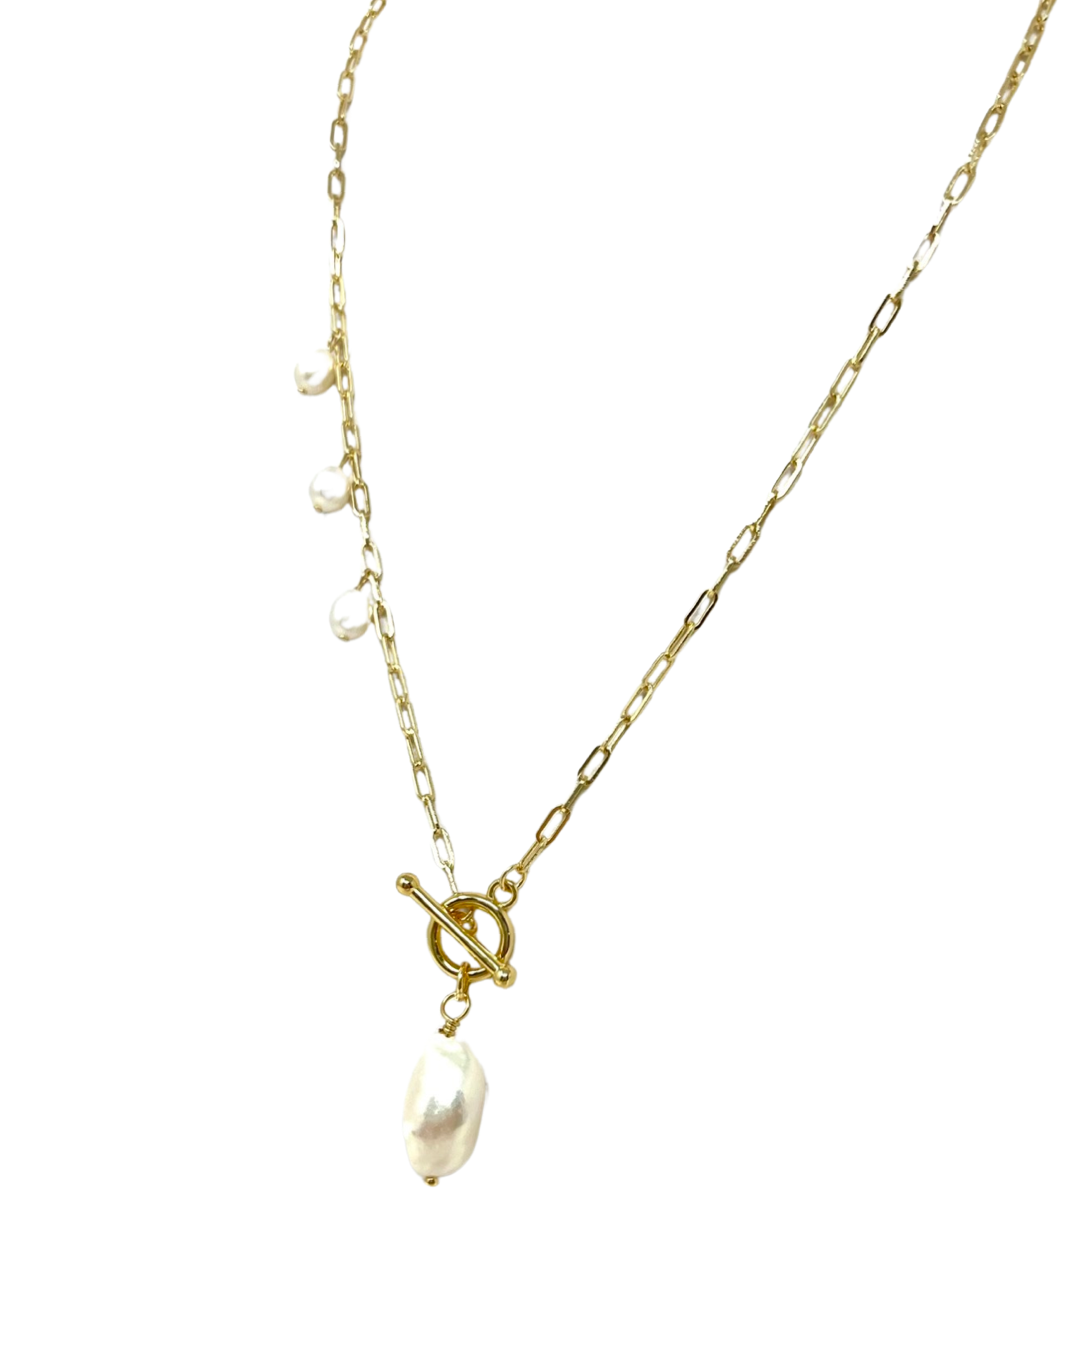 Pearl Chainlink Necklace in Gold